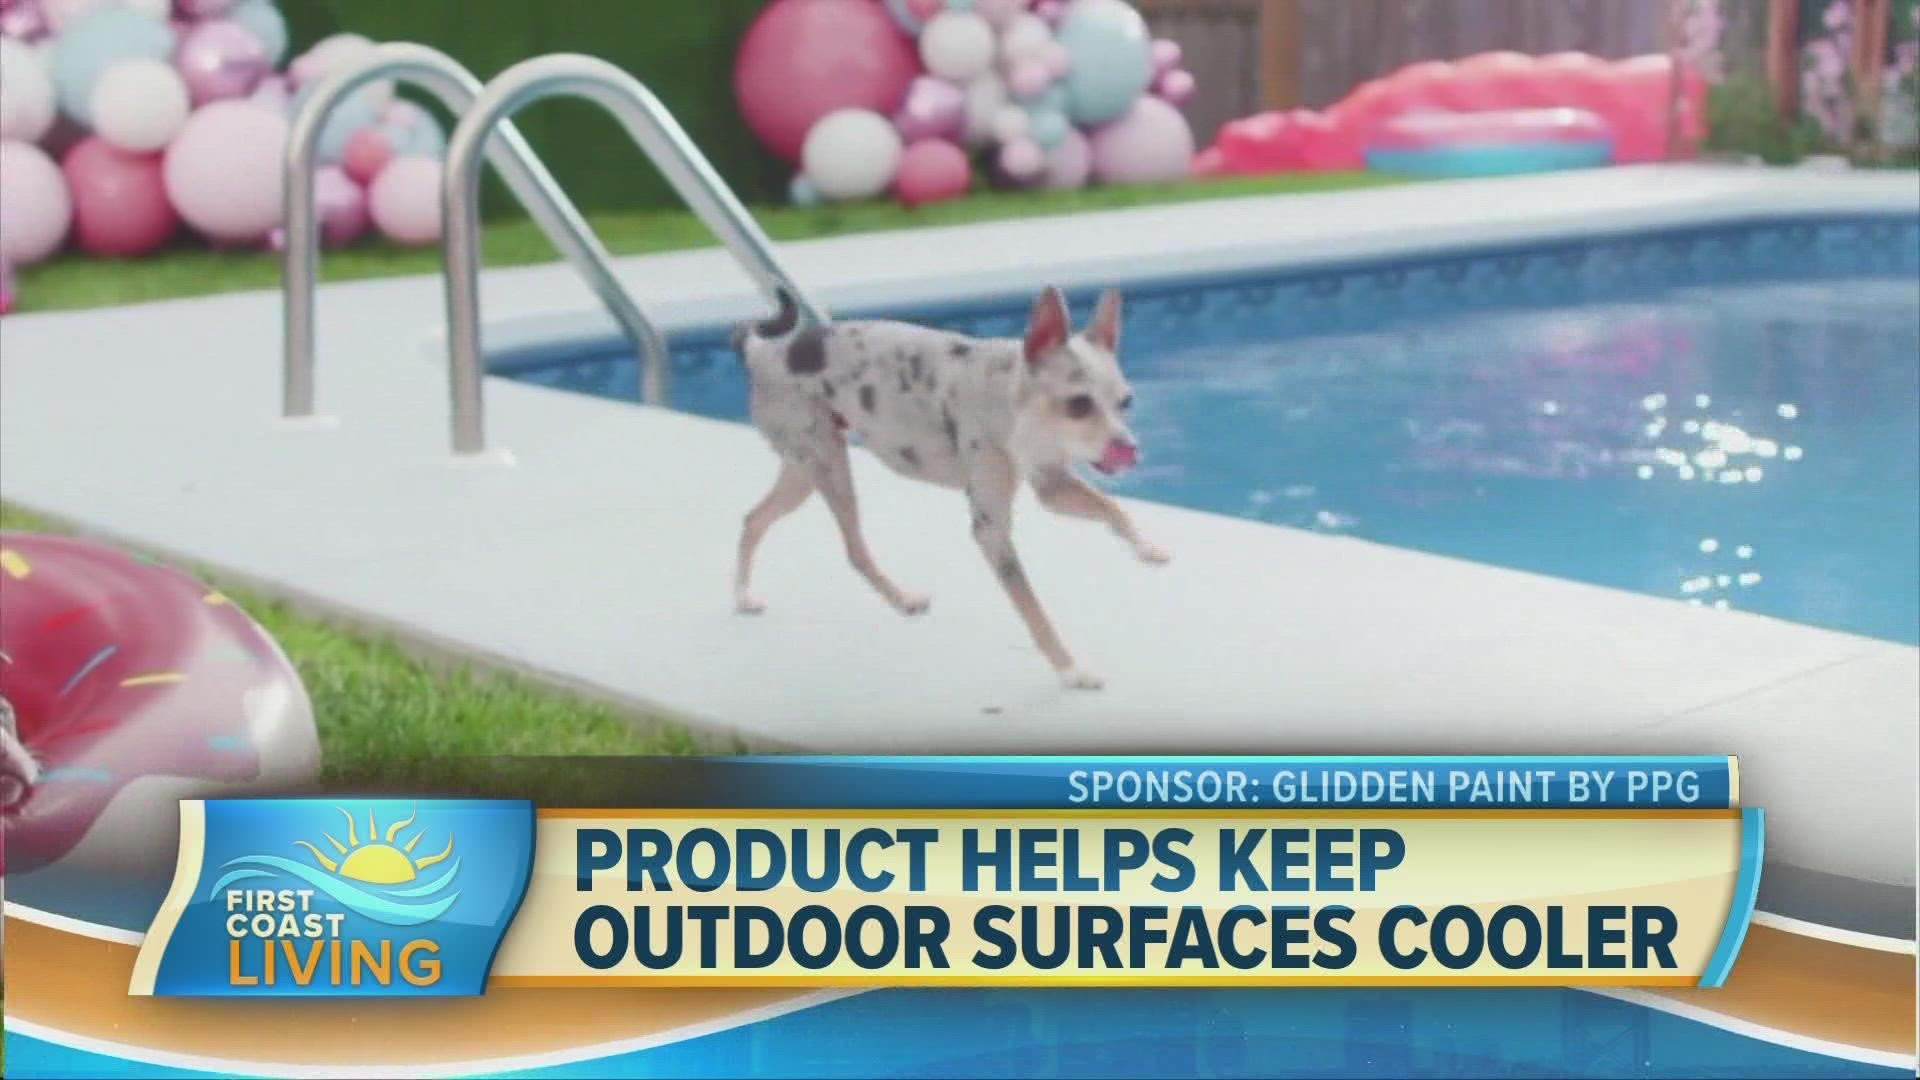 Home improvement expert, Kathryn Emery shares a new product line that will keep your outdoor concrete surfaces, wood patios, porches and pool decks feeling cool.